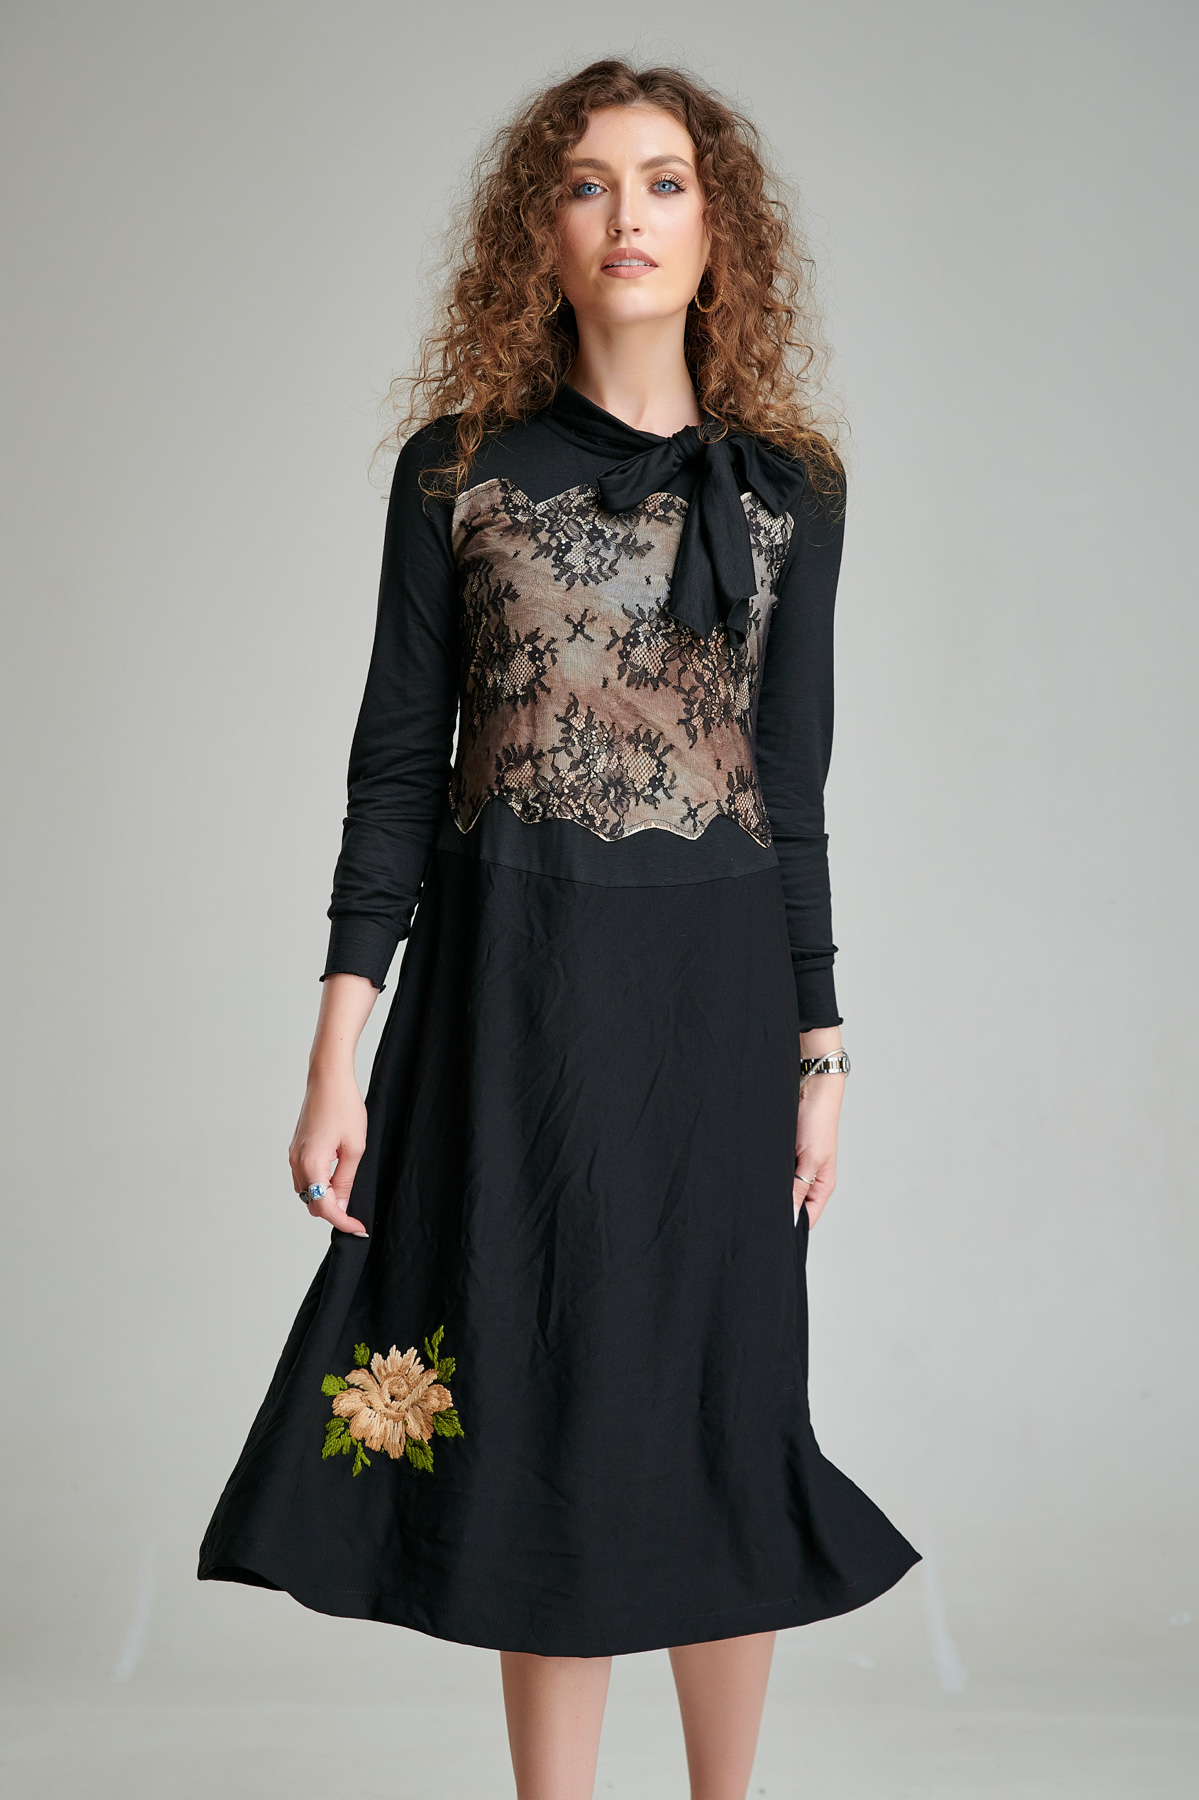 ALEXA casual black dress with lace and floral embroidery. Natural fabrics, original design, handmade embroidery